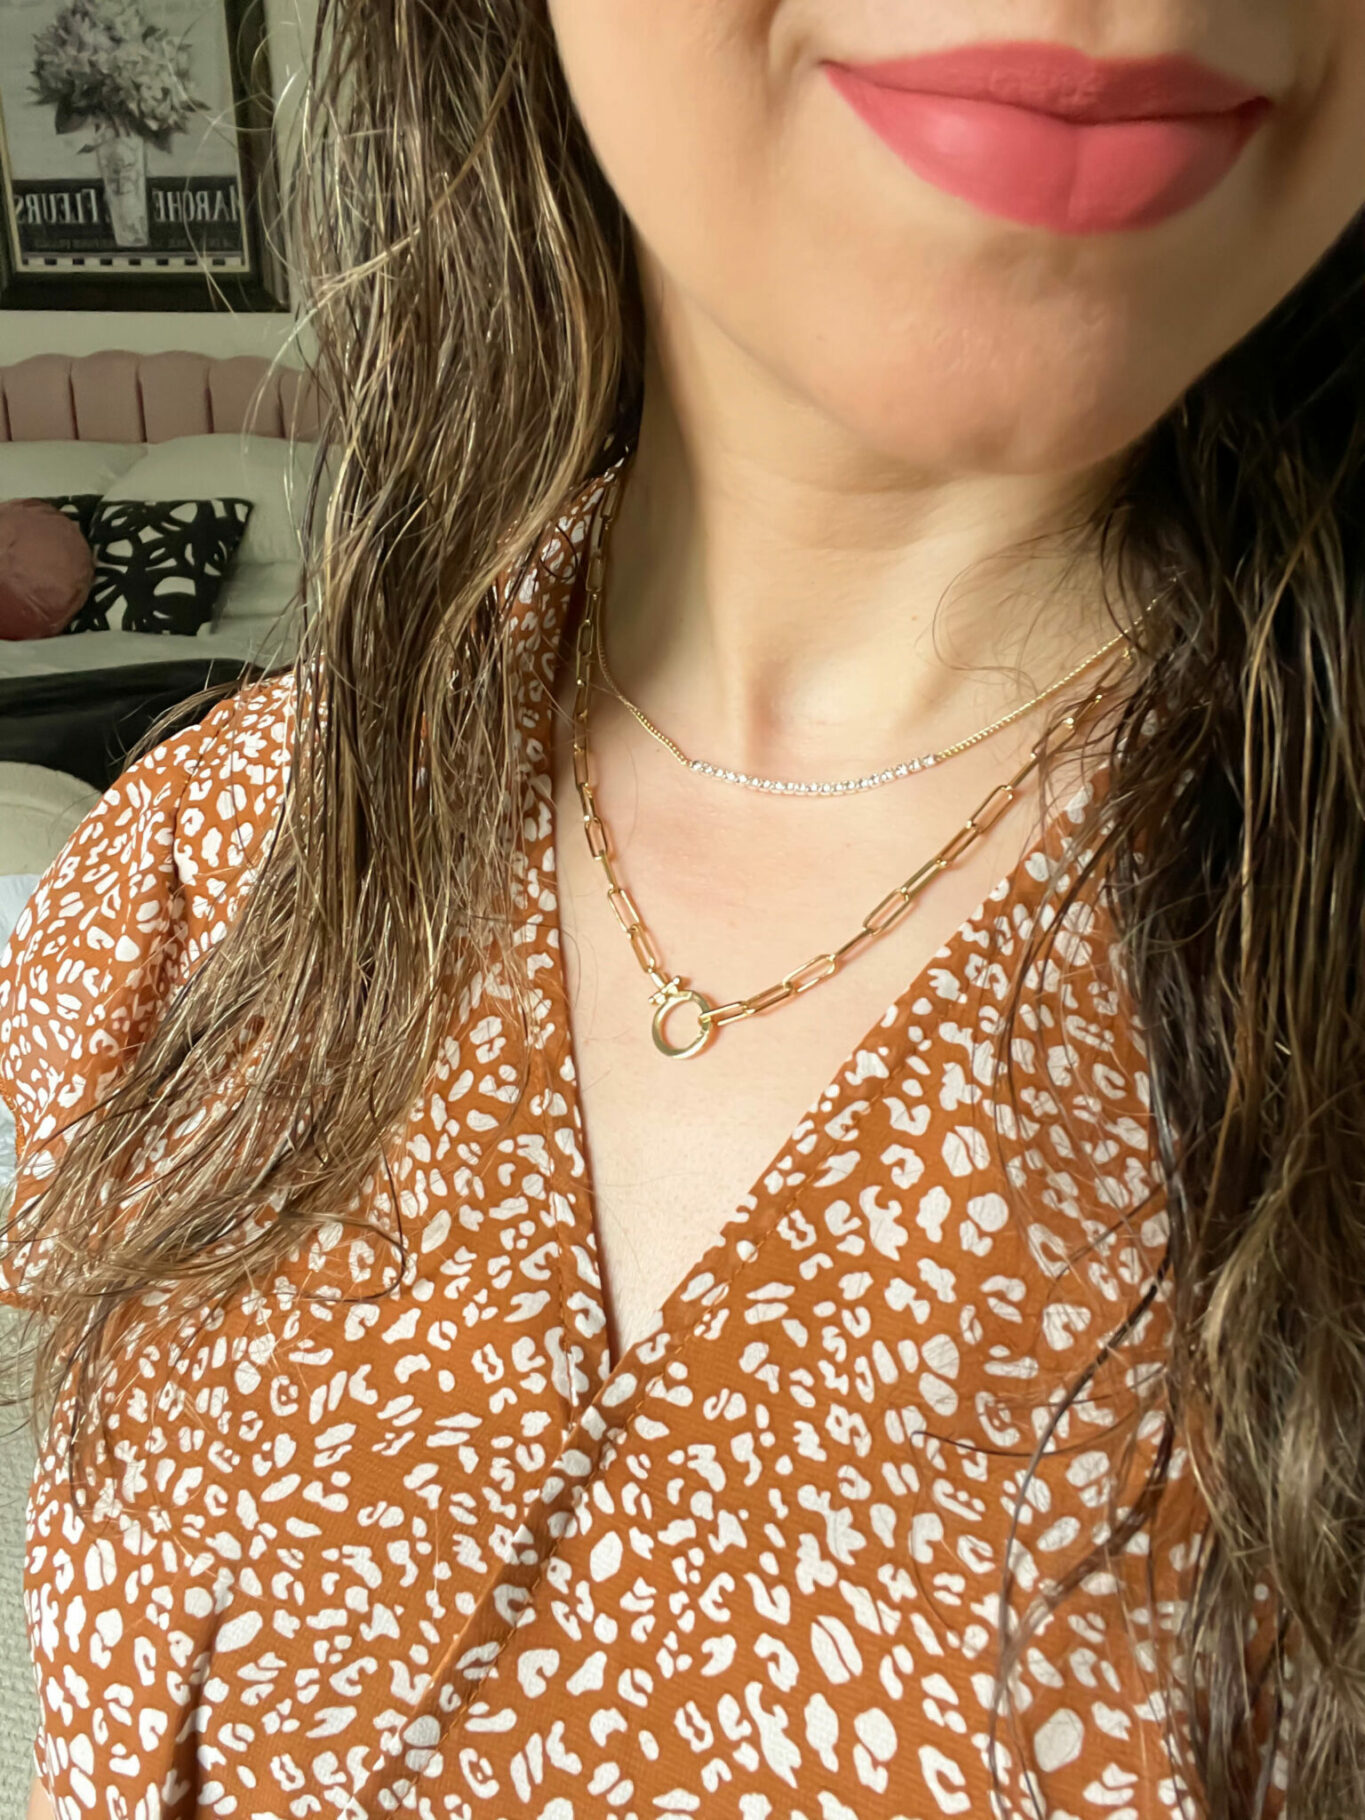 Gorjana Stacking Necklaces by popular Chicago fashion blog, Glass of Glam: image of a woman wearing a leopard print top and Gorjana stacking necklaces. 